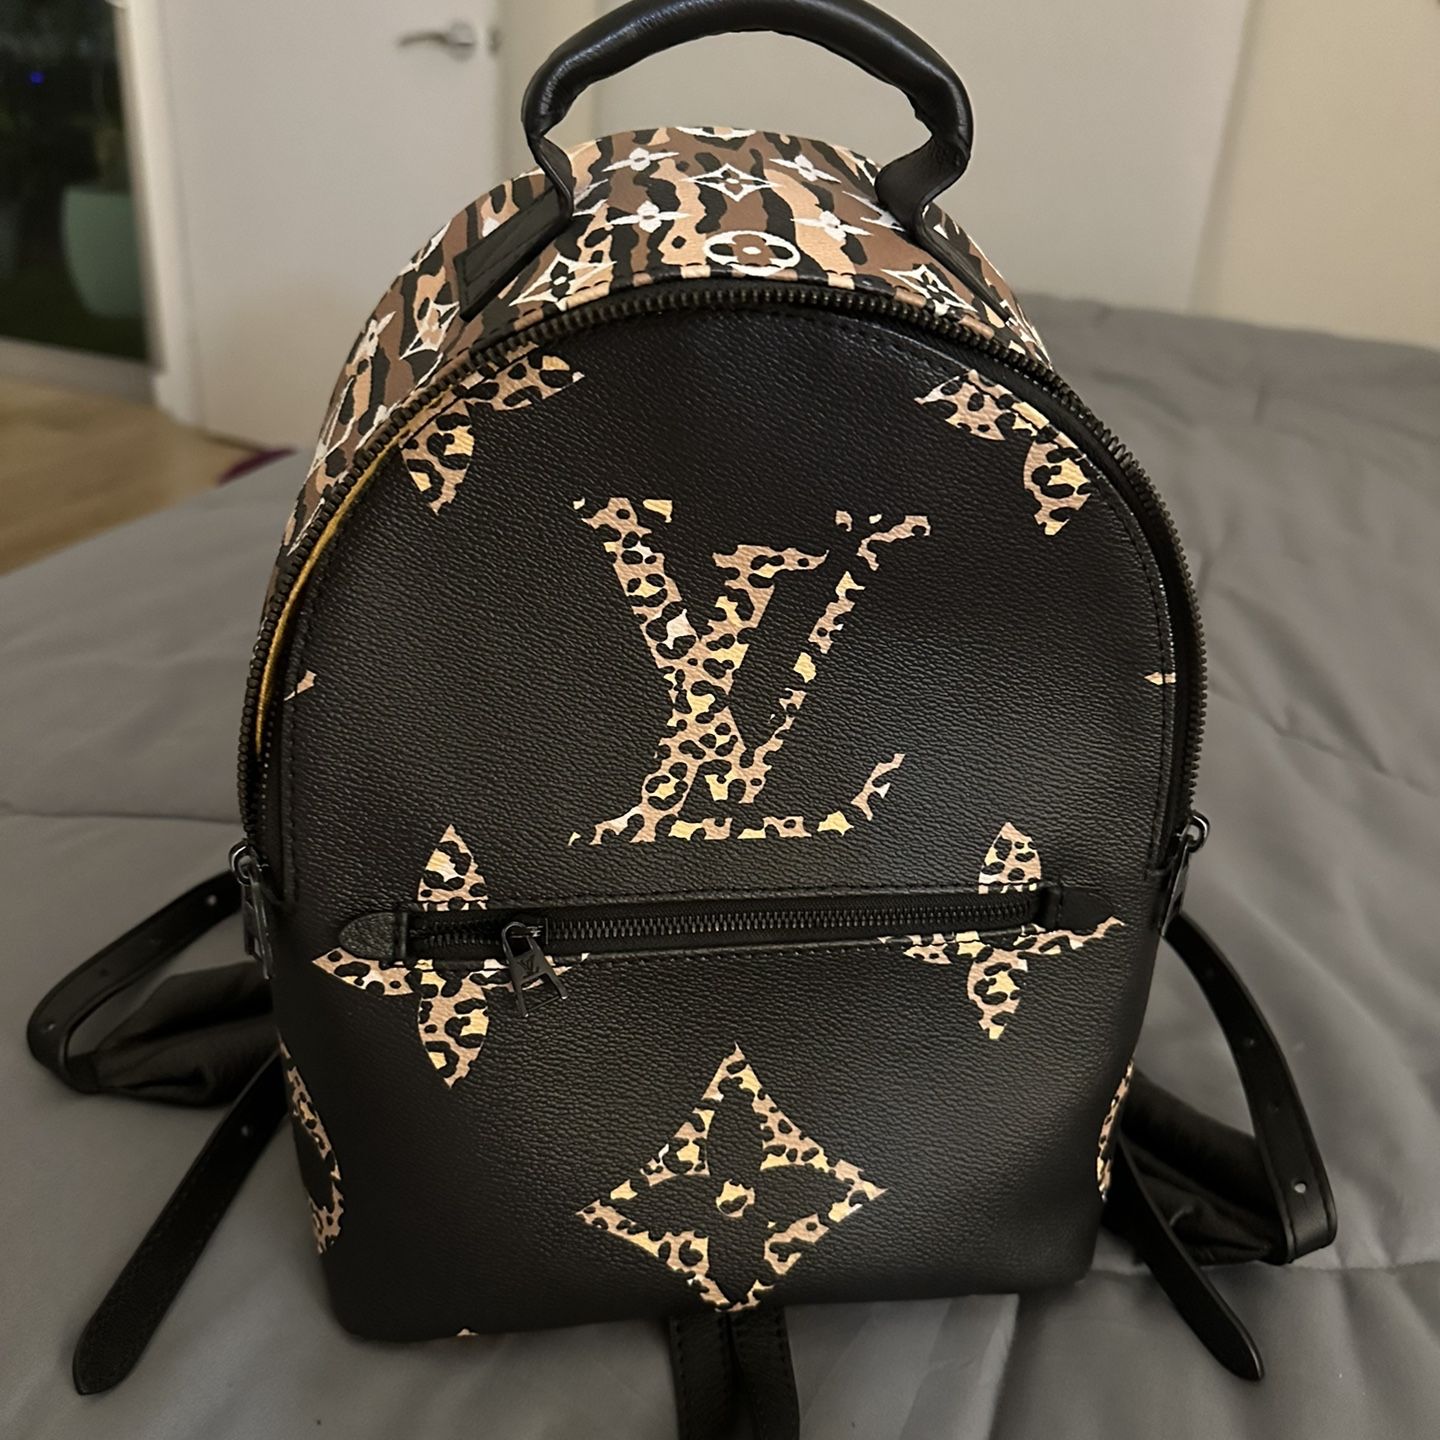 LV Louis Vuitton Ellipse Backpack Turtle Shell Handbag Sac Monogram Book  Bag Travel Purse Looks New (unauthentic) for Sale in Miami, FL - OfferUp